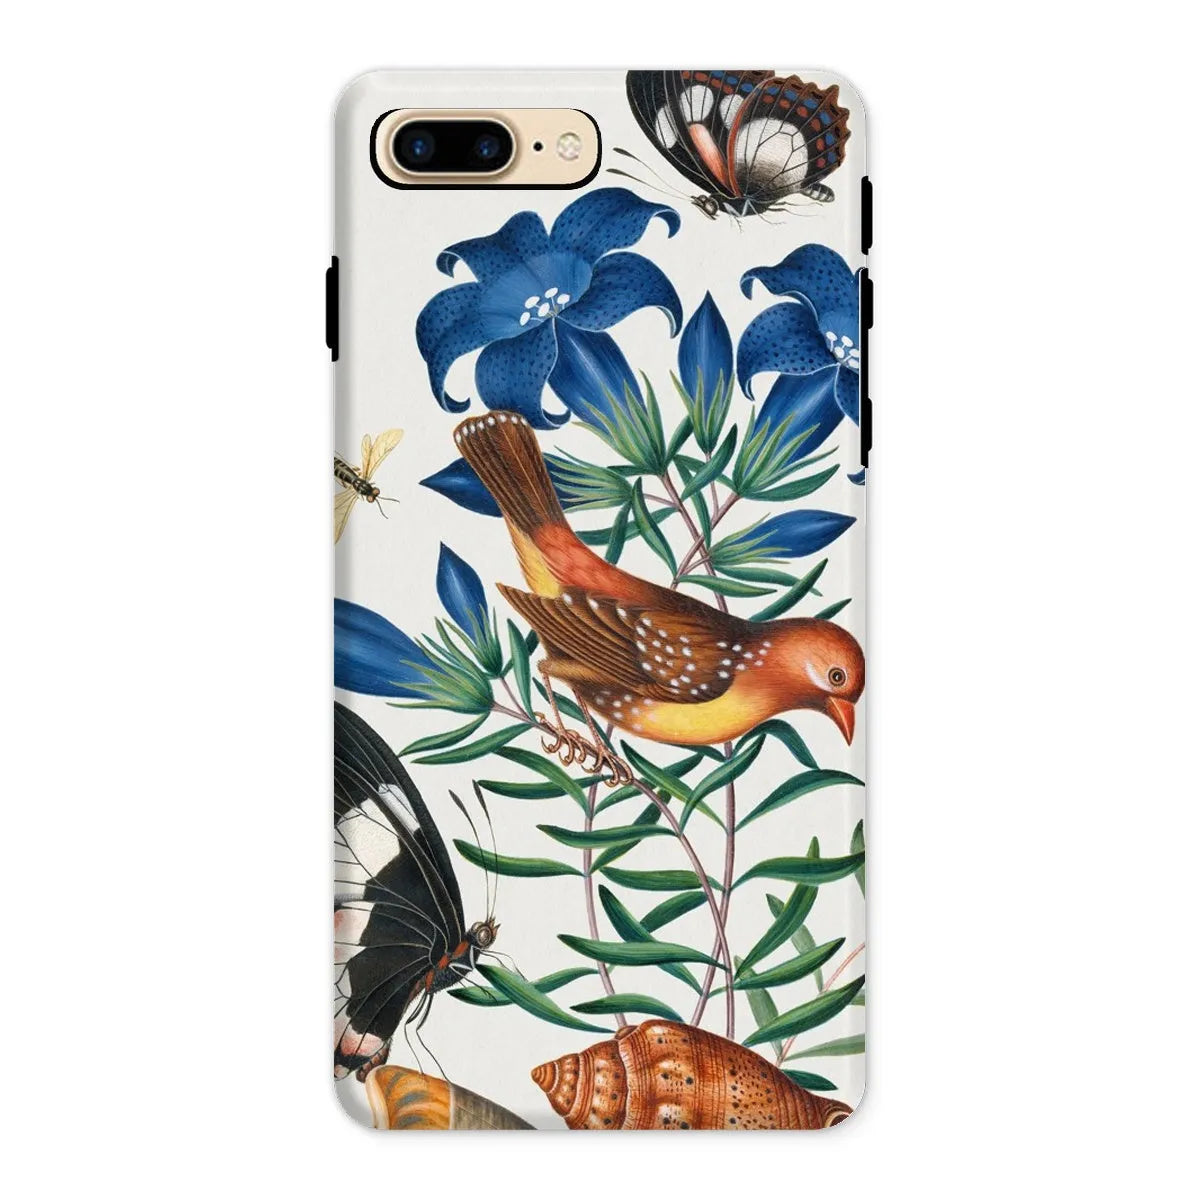 Avadavat Gentian Sawfly Swallowtail And Shells Phone Case - James Bolton - Iphone 8 Plus / Matte - Mobile Phone Cases